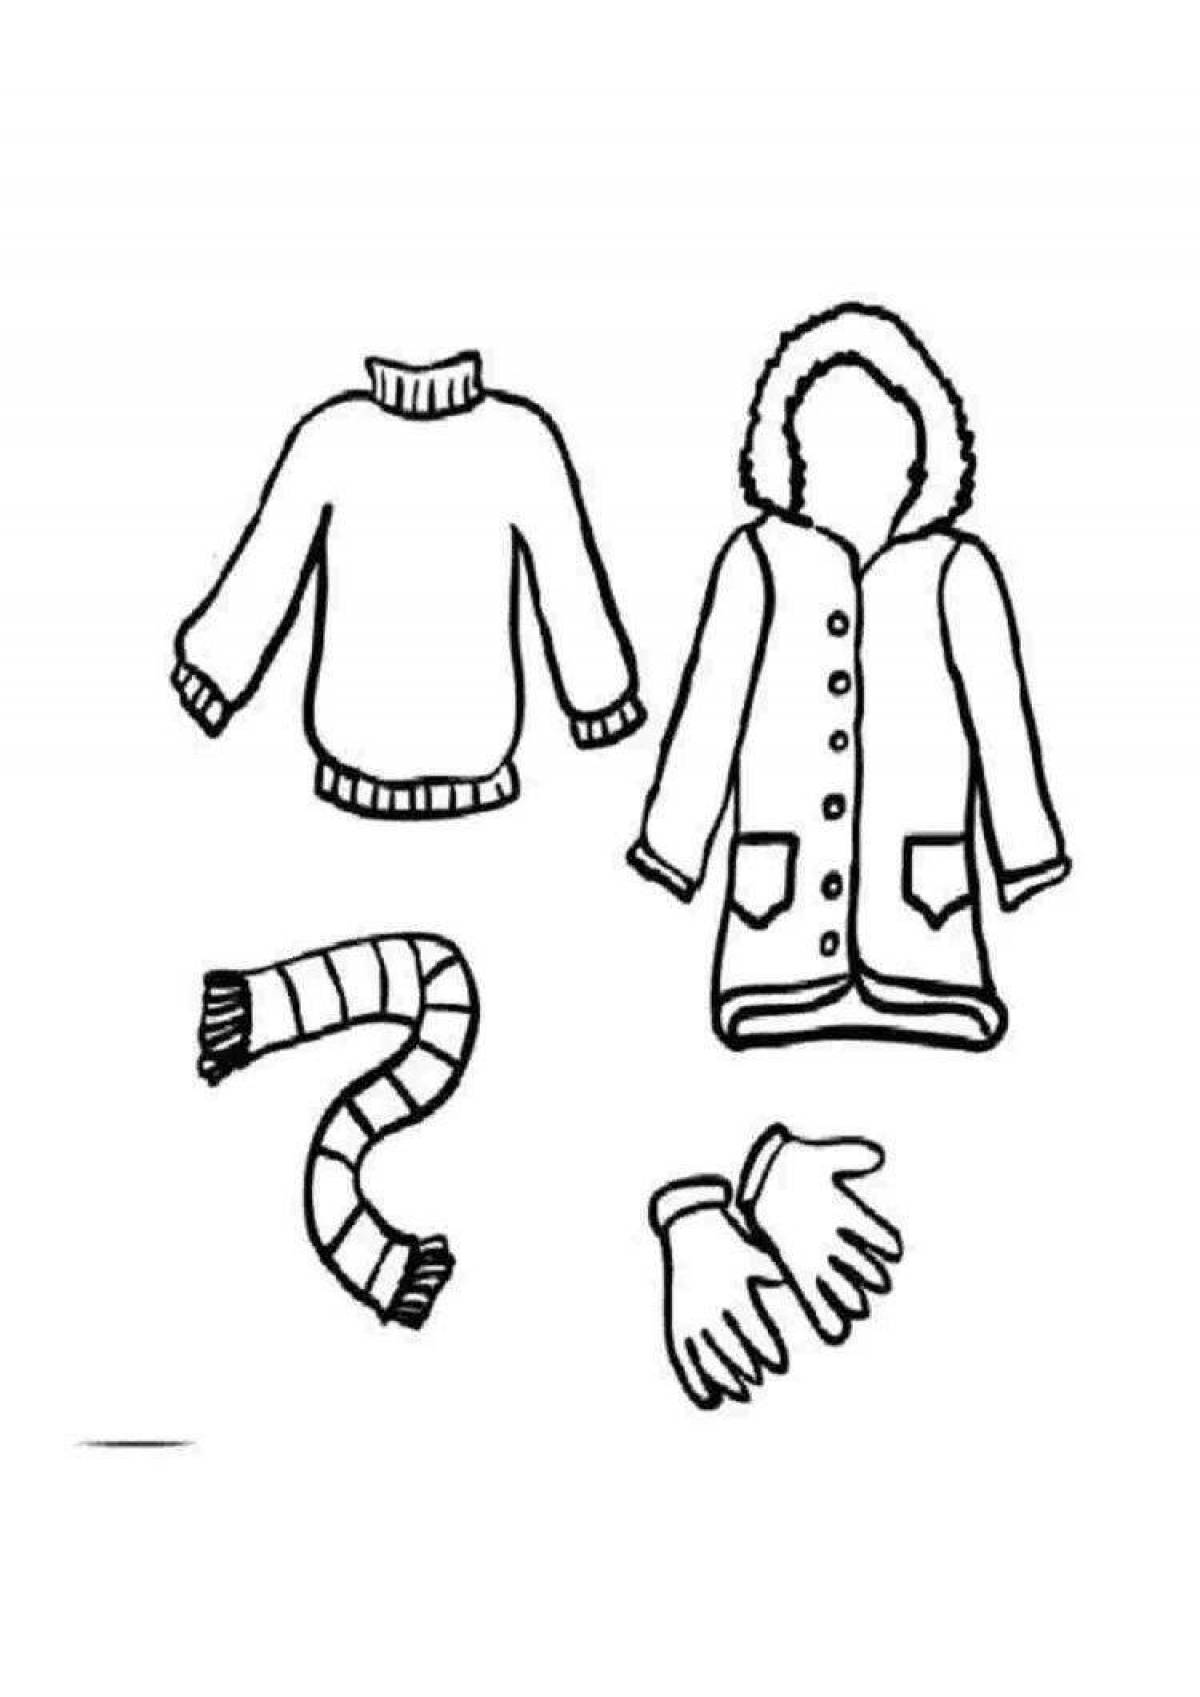 Coloring book great winter clothes for kids